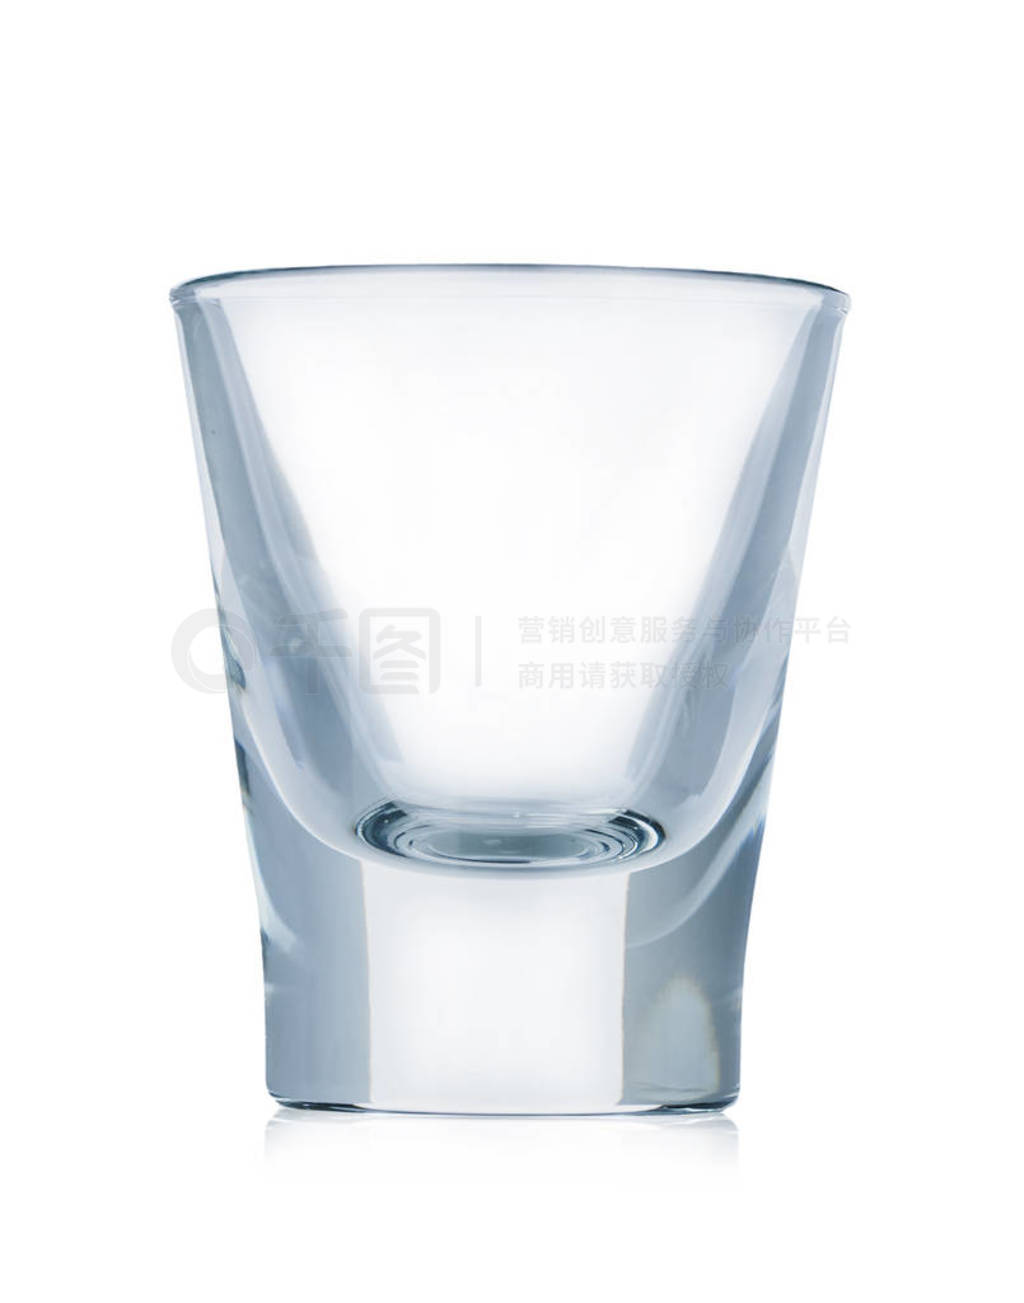 empty glass for a strong alcoholic drink